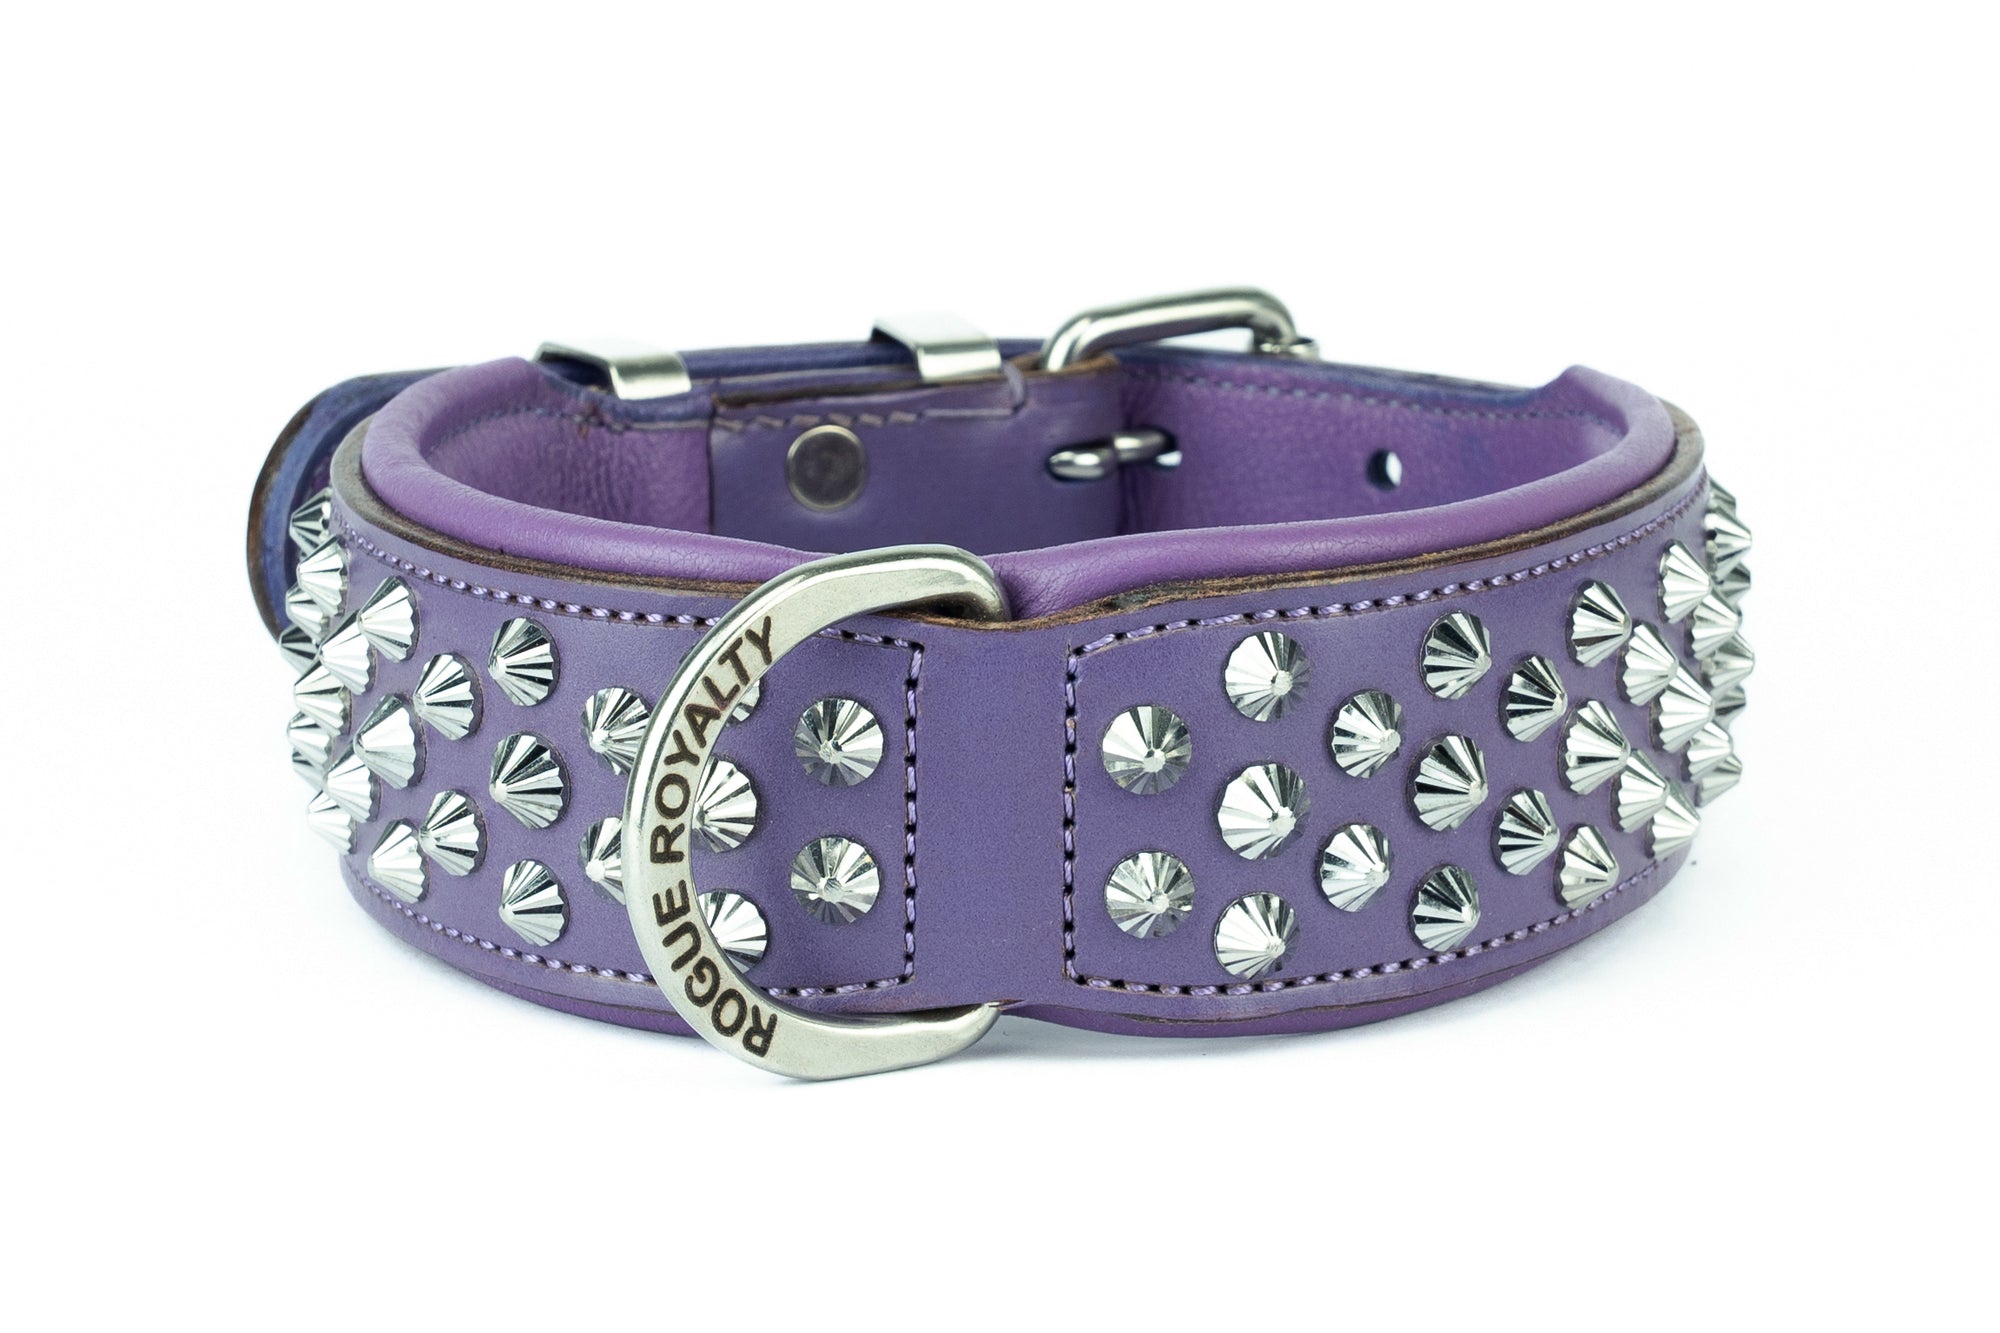 Hand Made Leather Dog Collar - Imperial Purple & Chrome (Wide Fit)